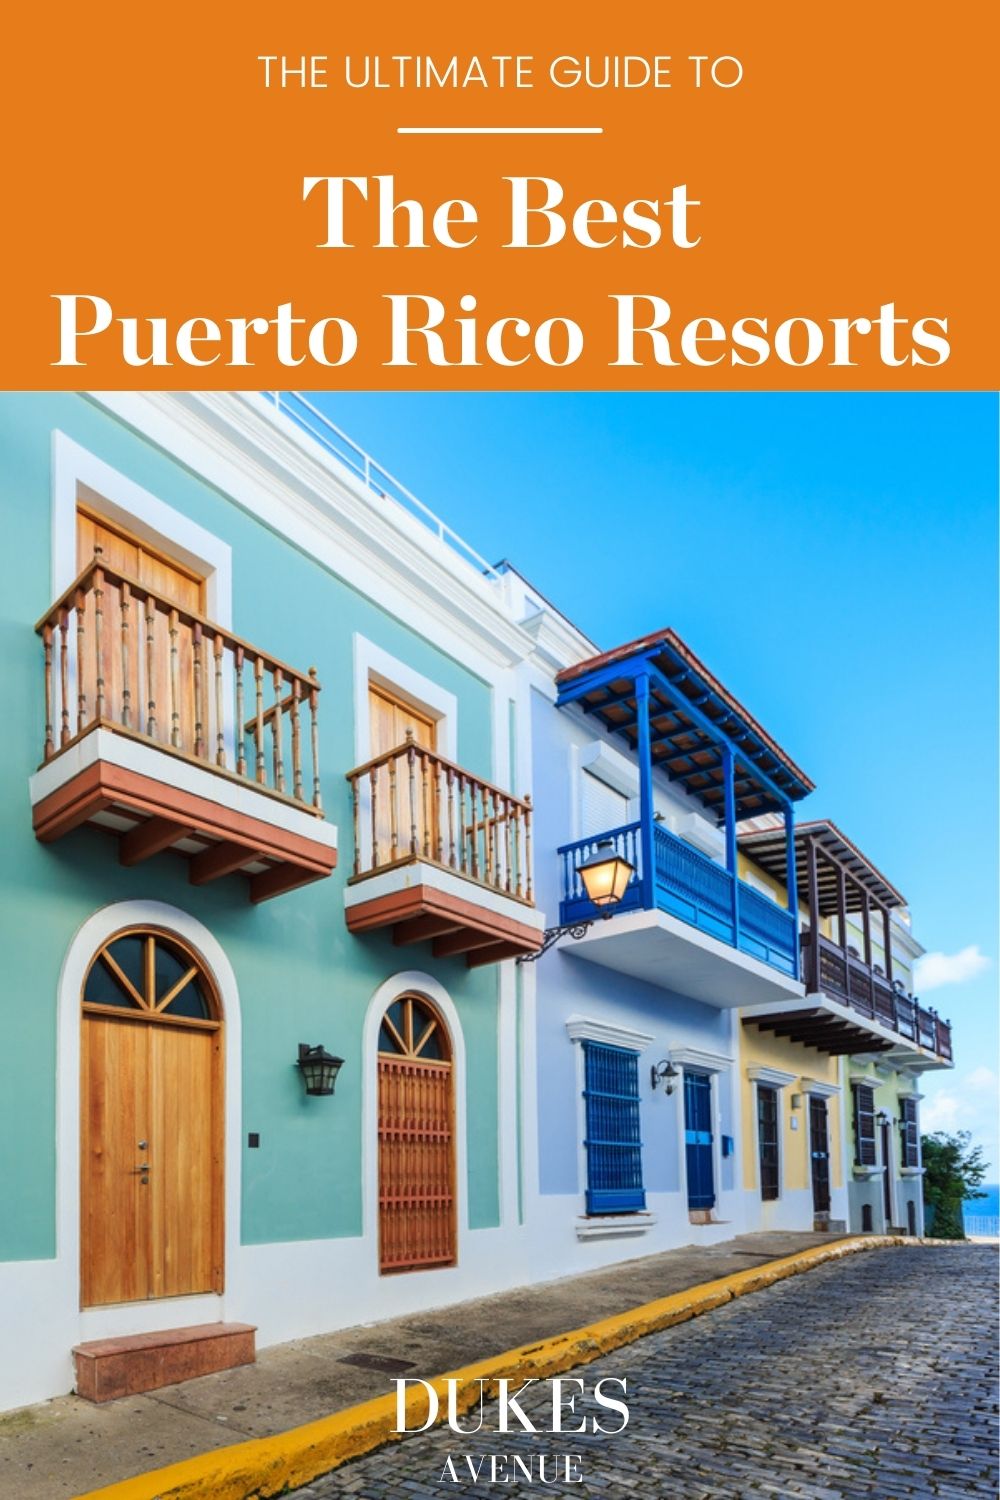 Image of colorful houses in Puerto Rico with text overlay 'The Best Puerto Rico Resorts'